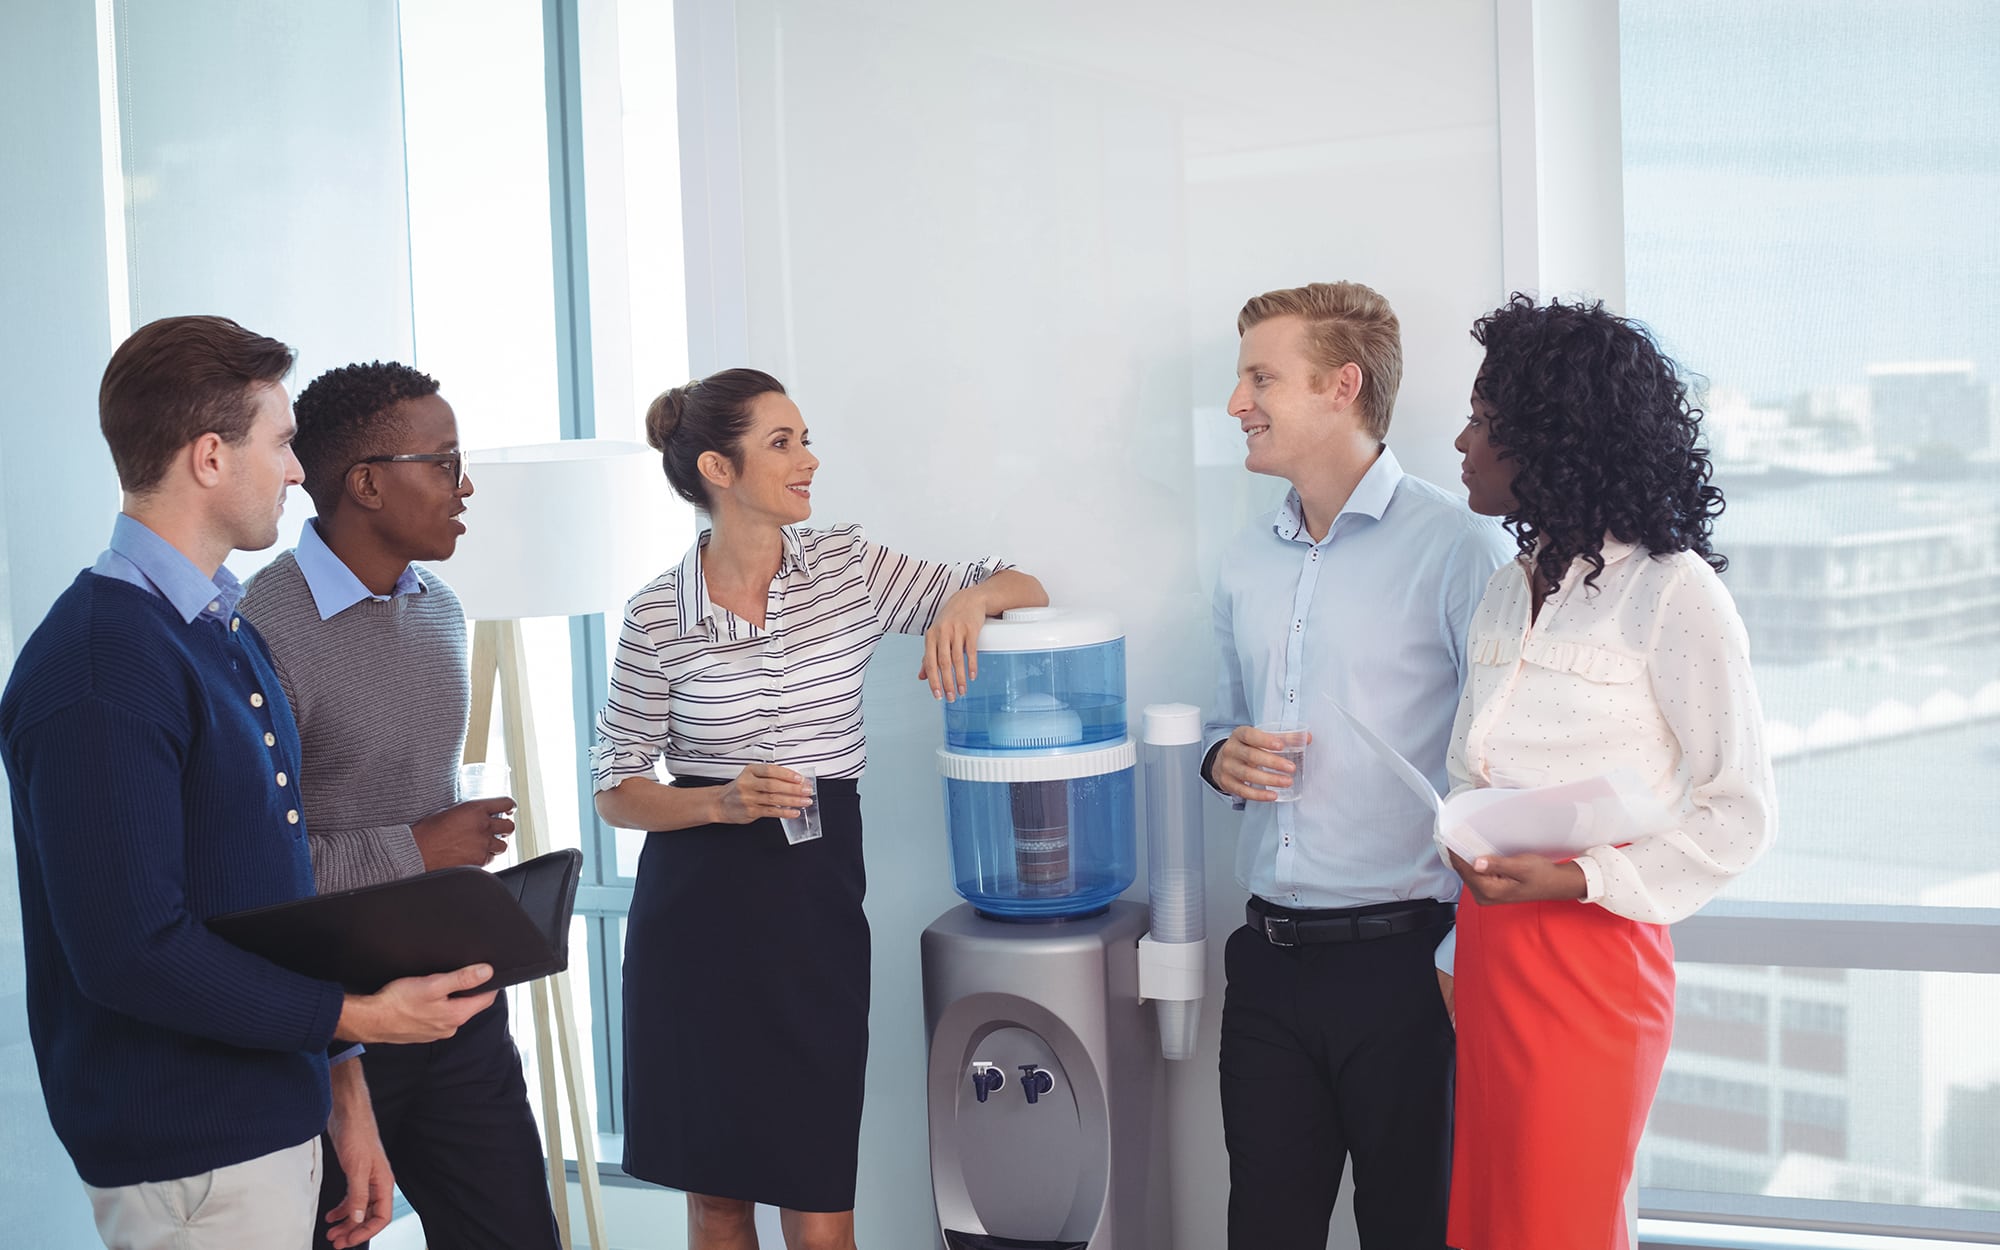 Factors to Consider When Choosing a Cooling Water Dispenser